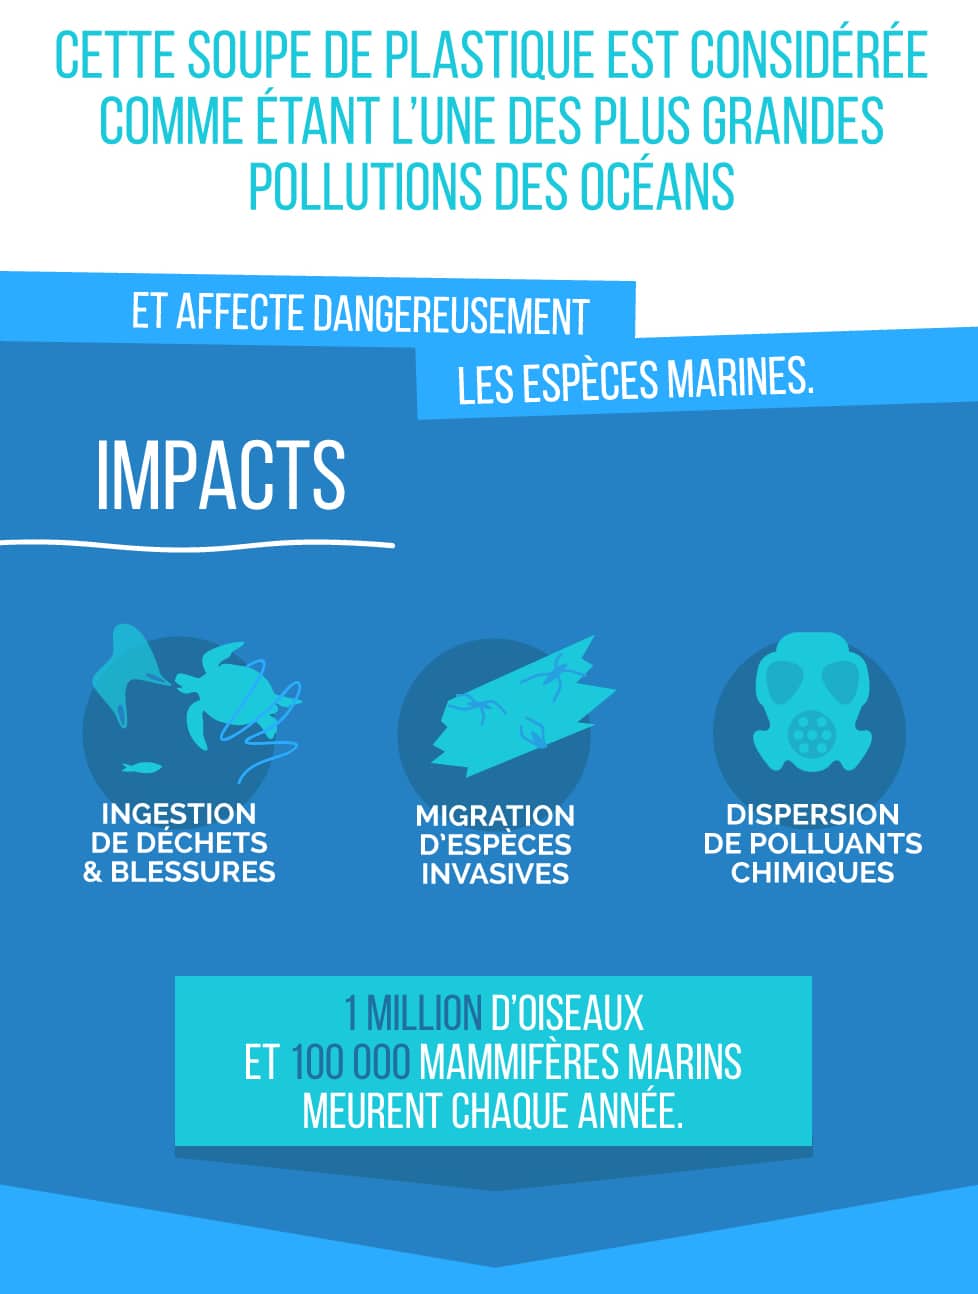 Impacts 7eme Continent